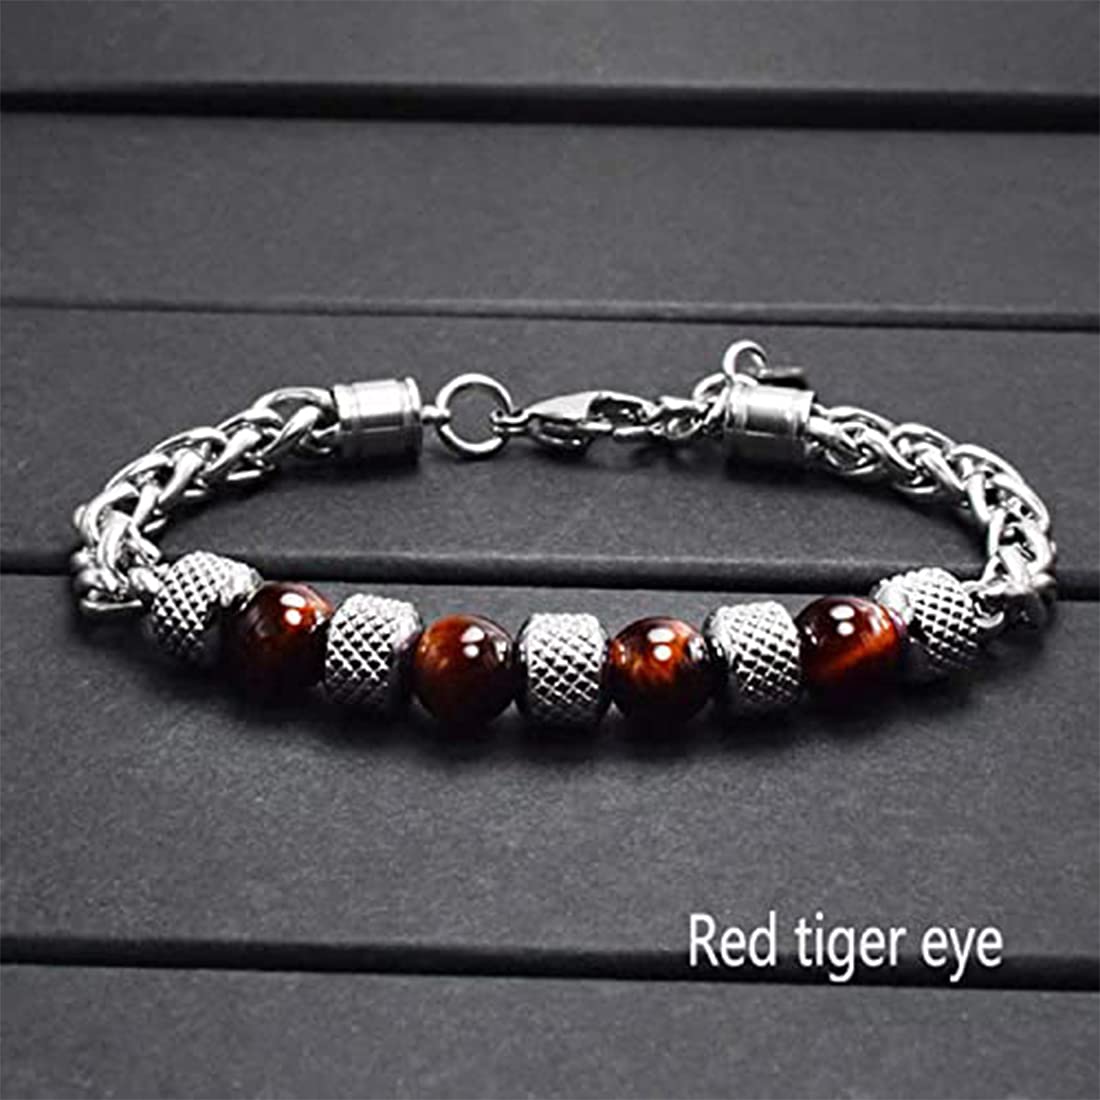 Yellow Chimes Beads Bracelet for Men Stainless Steel High Polished with Handmade Tiger Eye stones Bracelet for men and Boys.